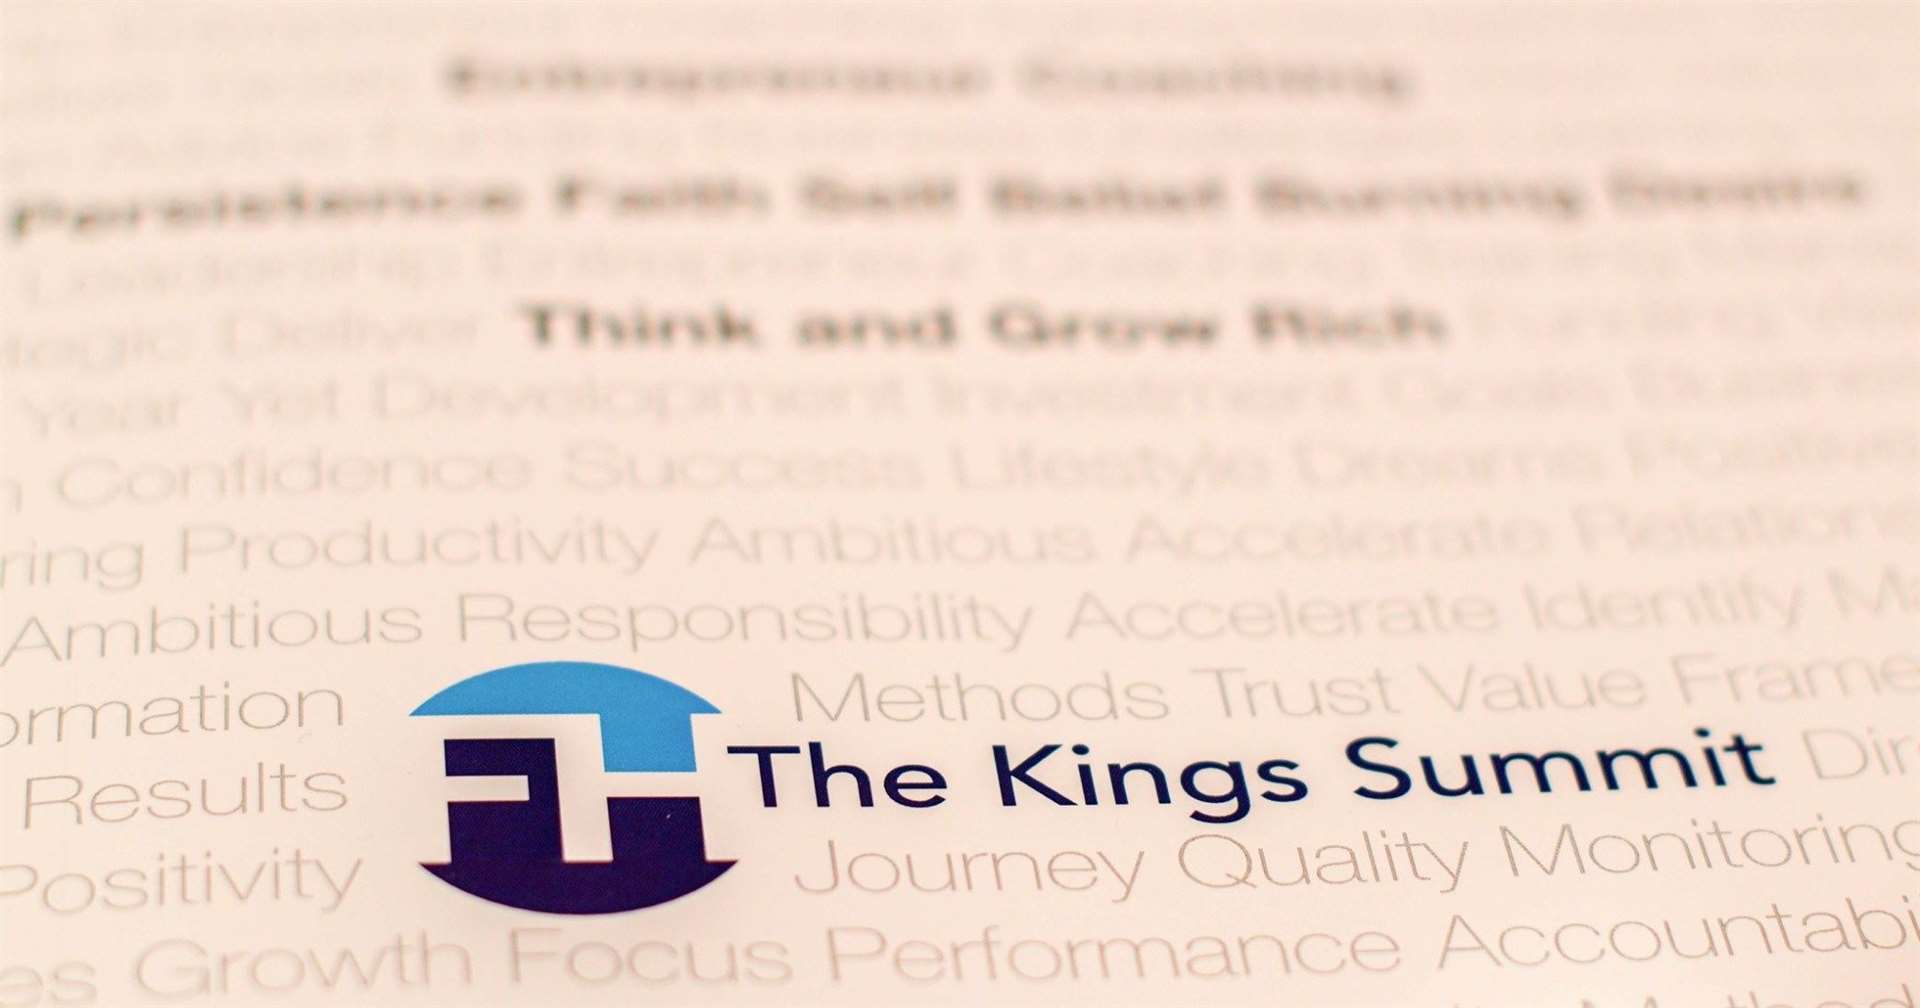 Are you a Kent business looking to move up another level? The 2019 Kings Summit Business Scale Up Conference in Canterbury has just what you need to succeed.